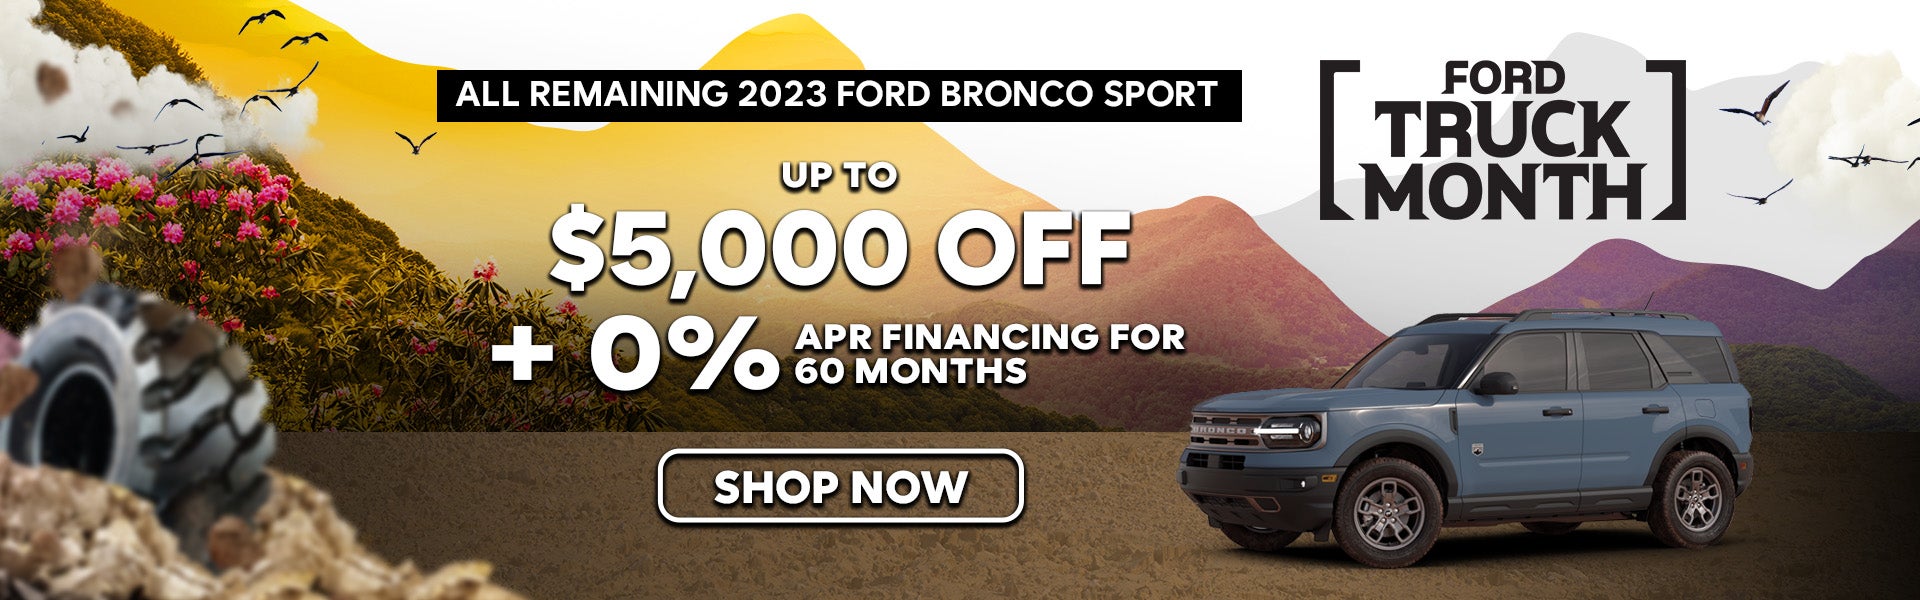 2023 Ford Bronco Sport Special Offer